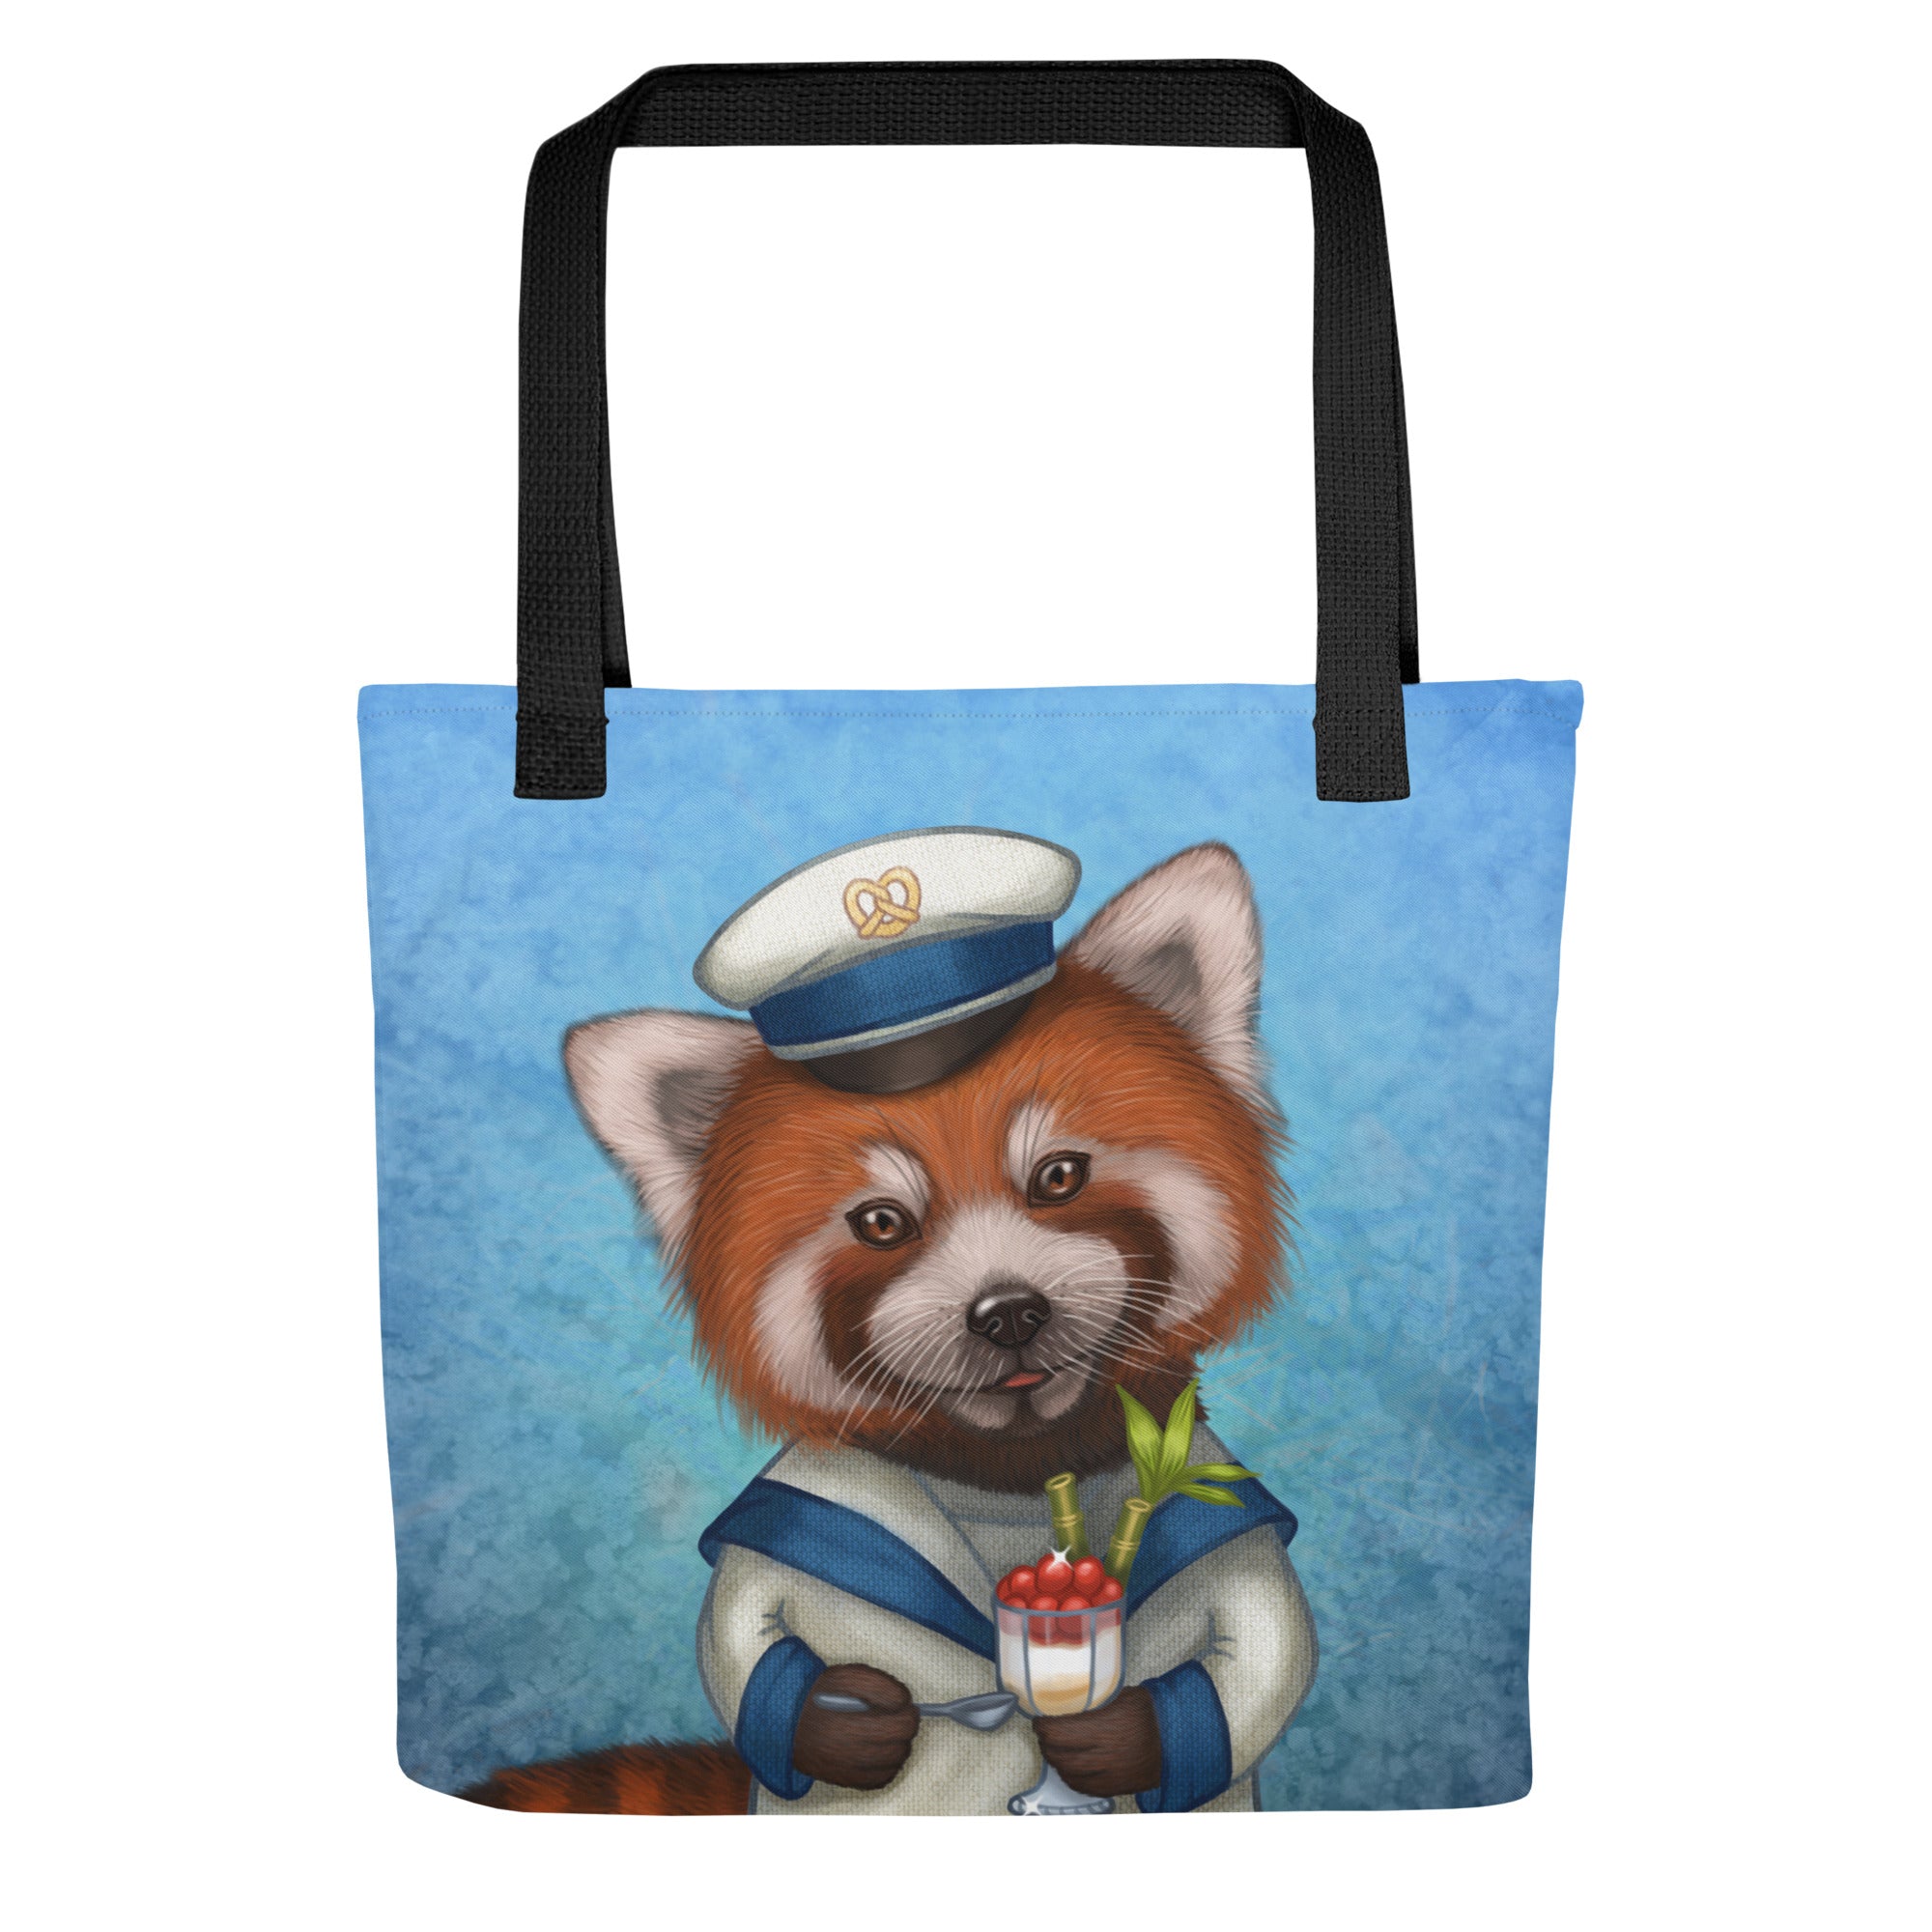 Tote bag "Life is uncertain so eat your dessert first" (Red panda)